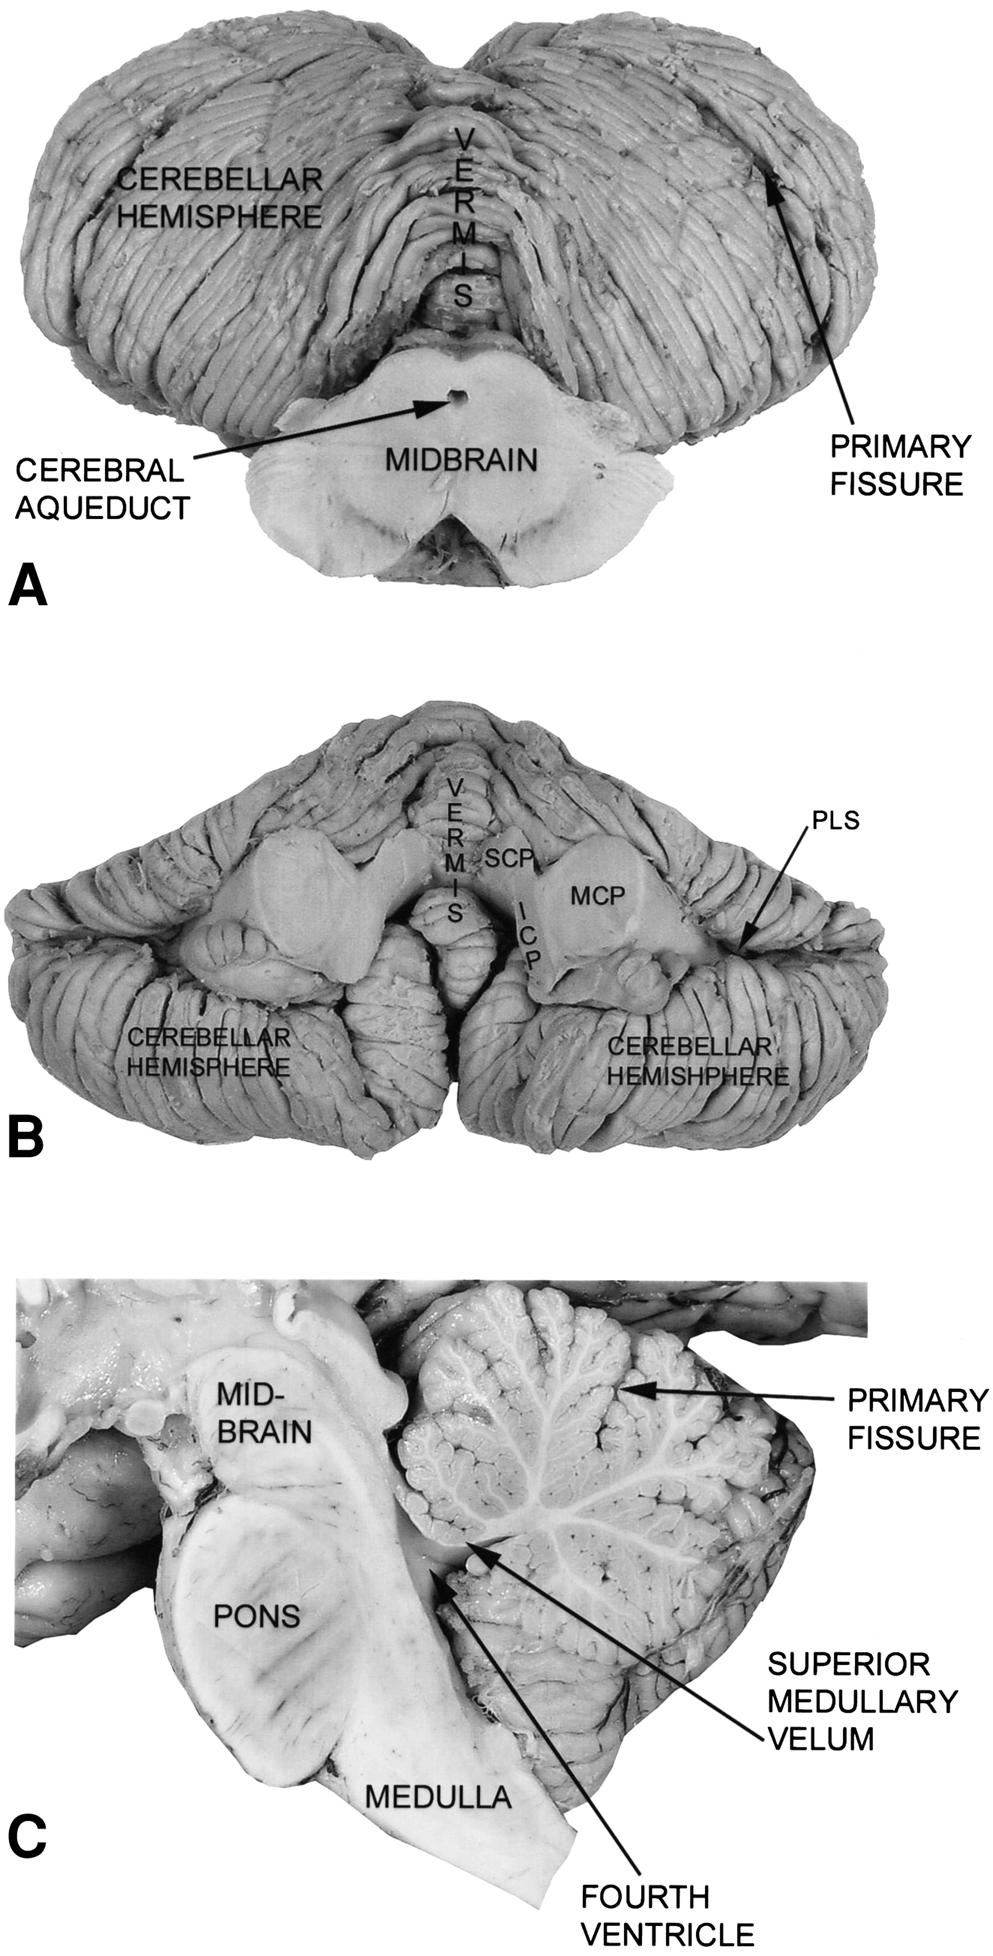 28 Maley Fig. 9. (A) Anterior view of the cerebellum. The cerebellum, with its cerebellar hemispheres and vermis, lies posterior to the midbrain.